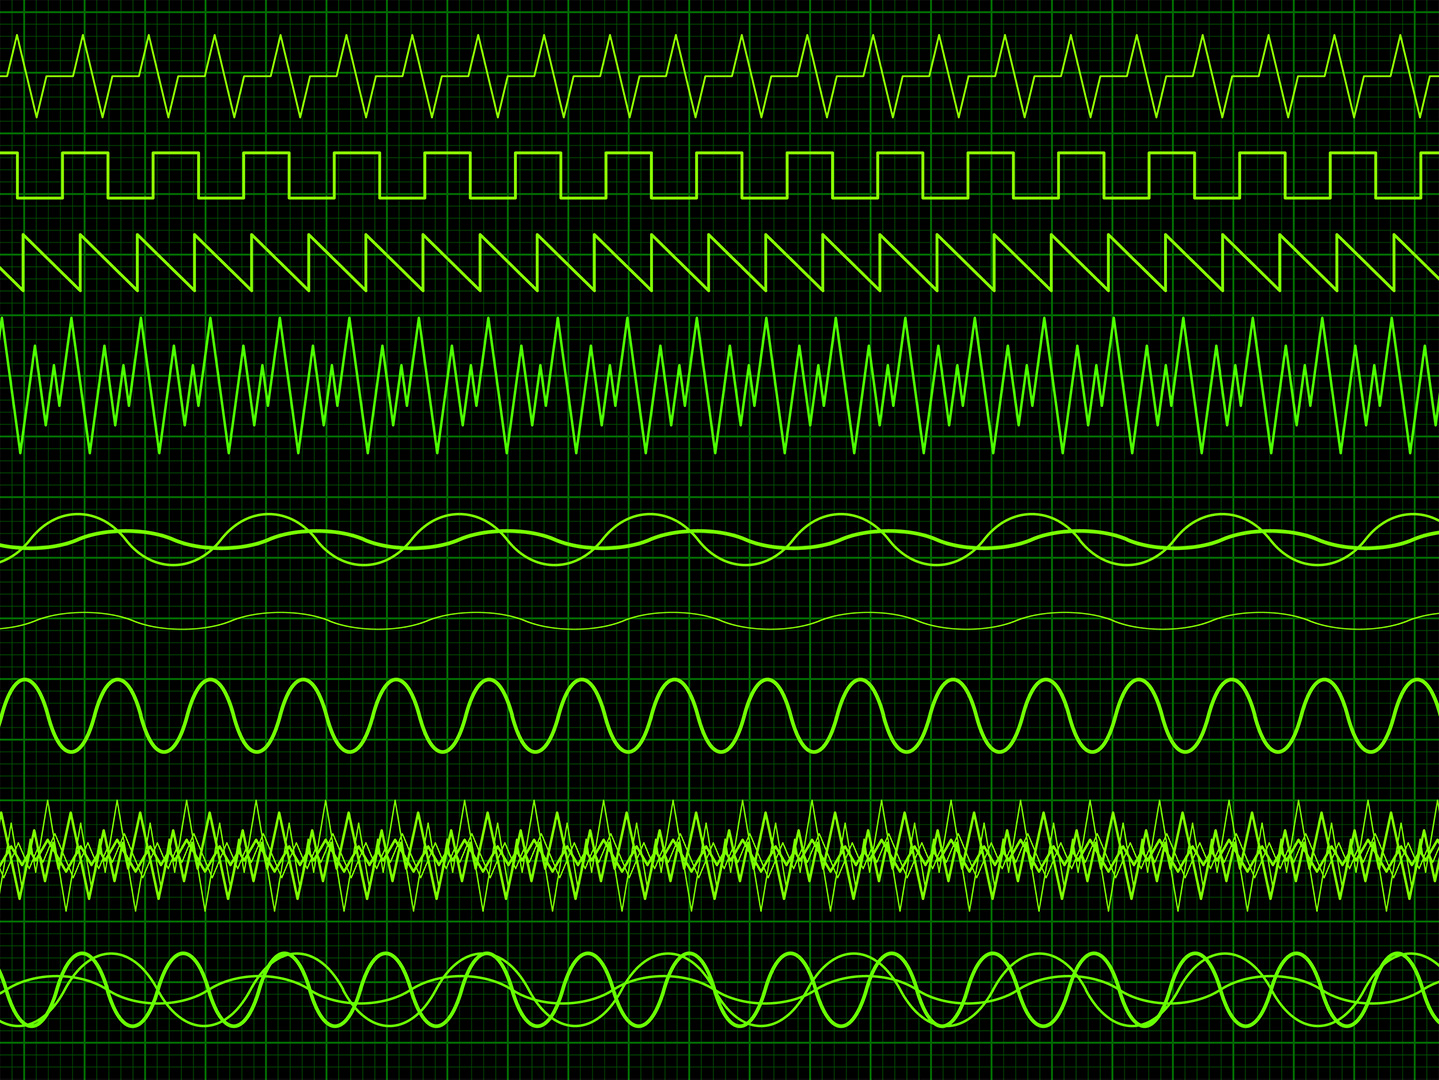 Waveforms a Power MOSFET may produce